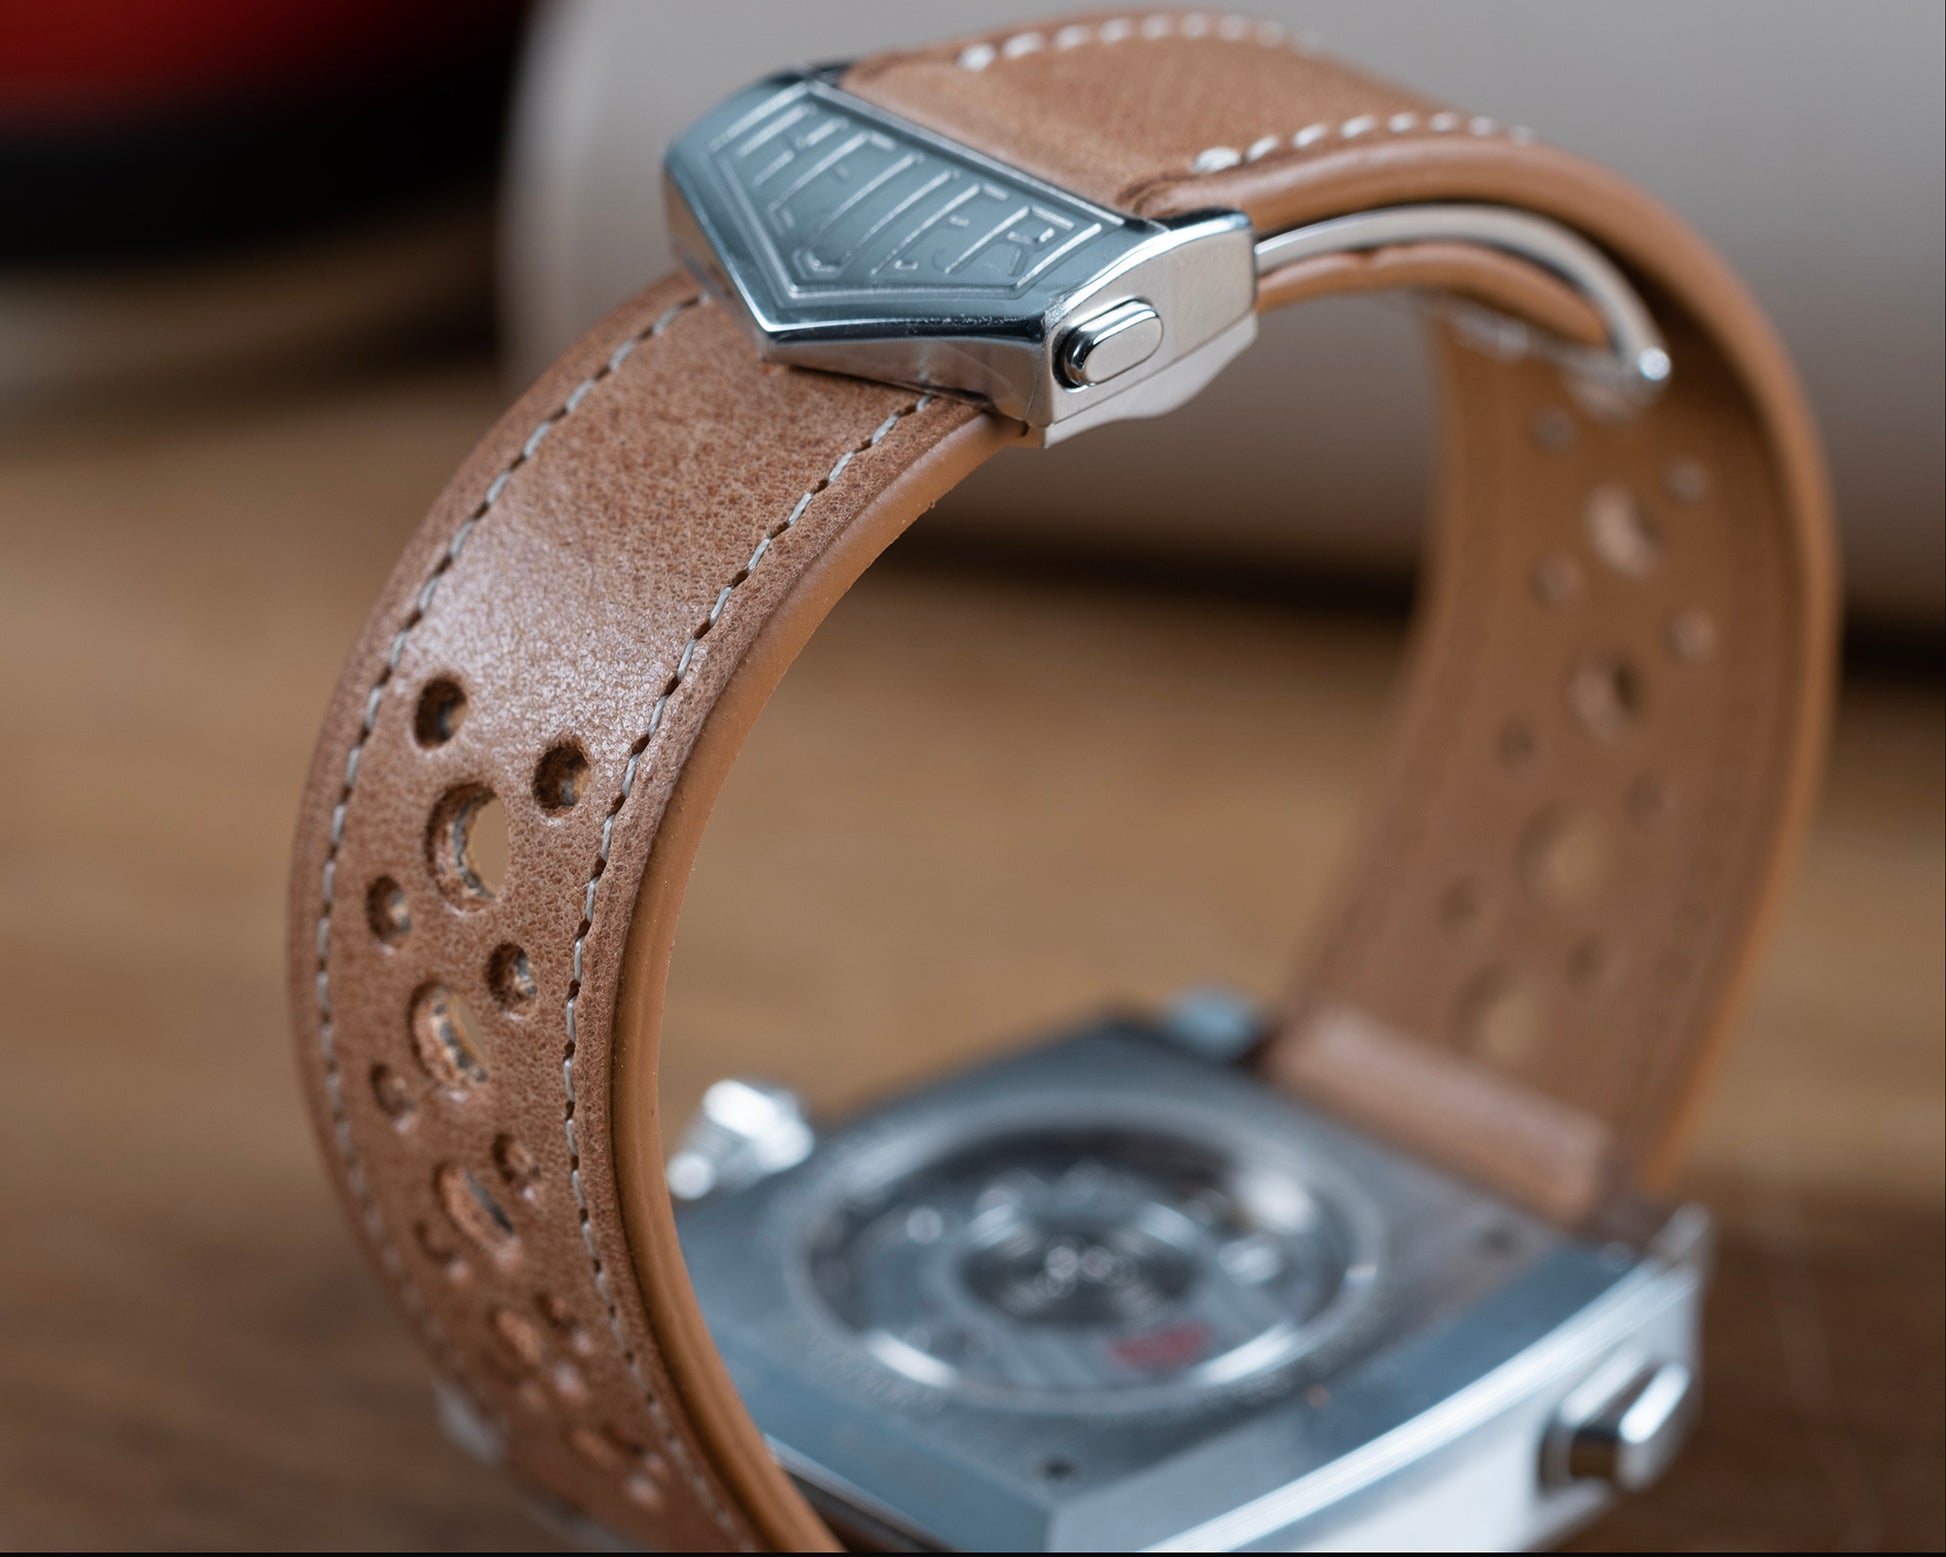 Watch Strap compatible buckle tag heuer tuscany camel - Atelier romane